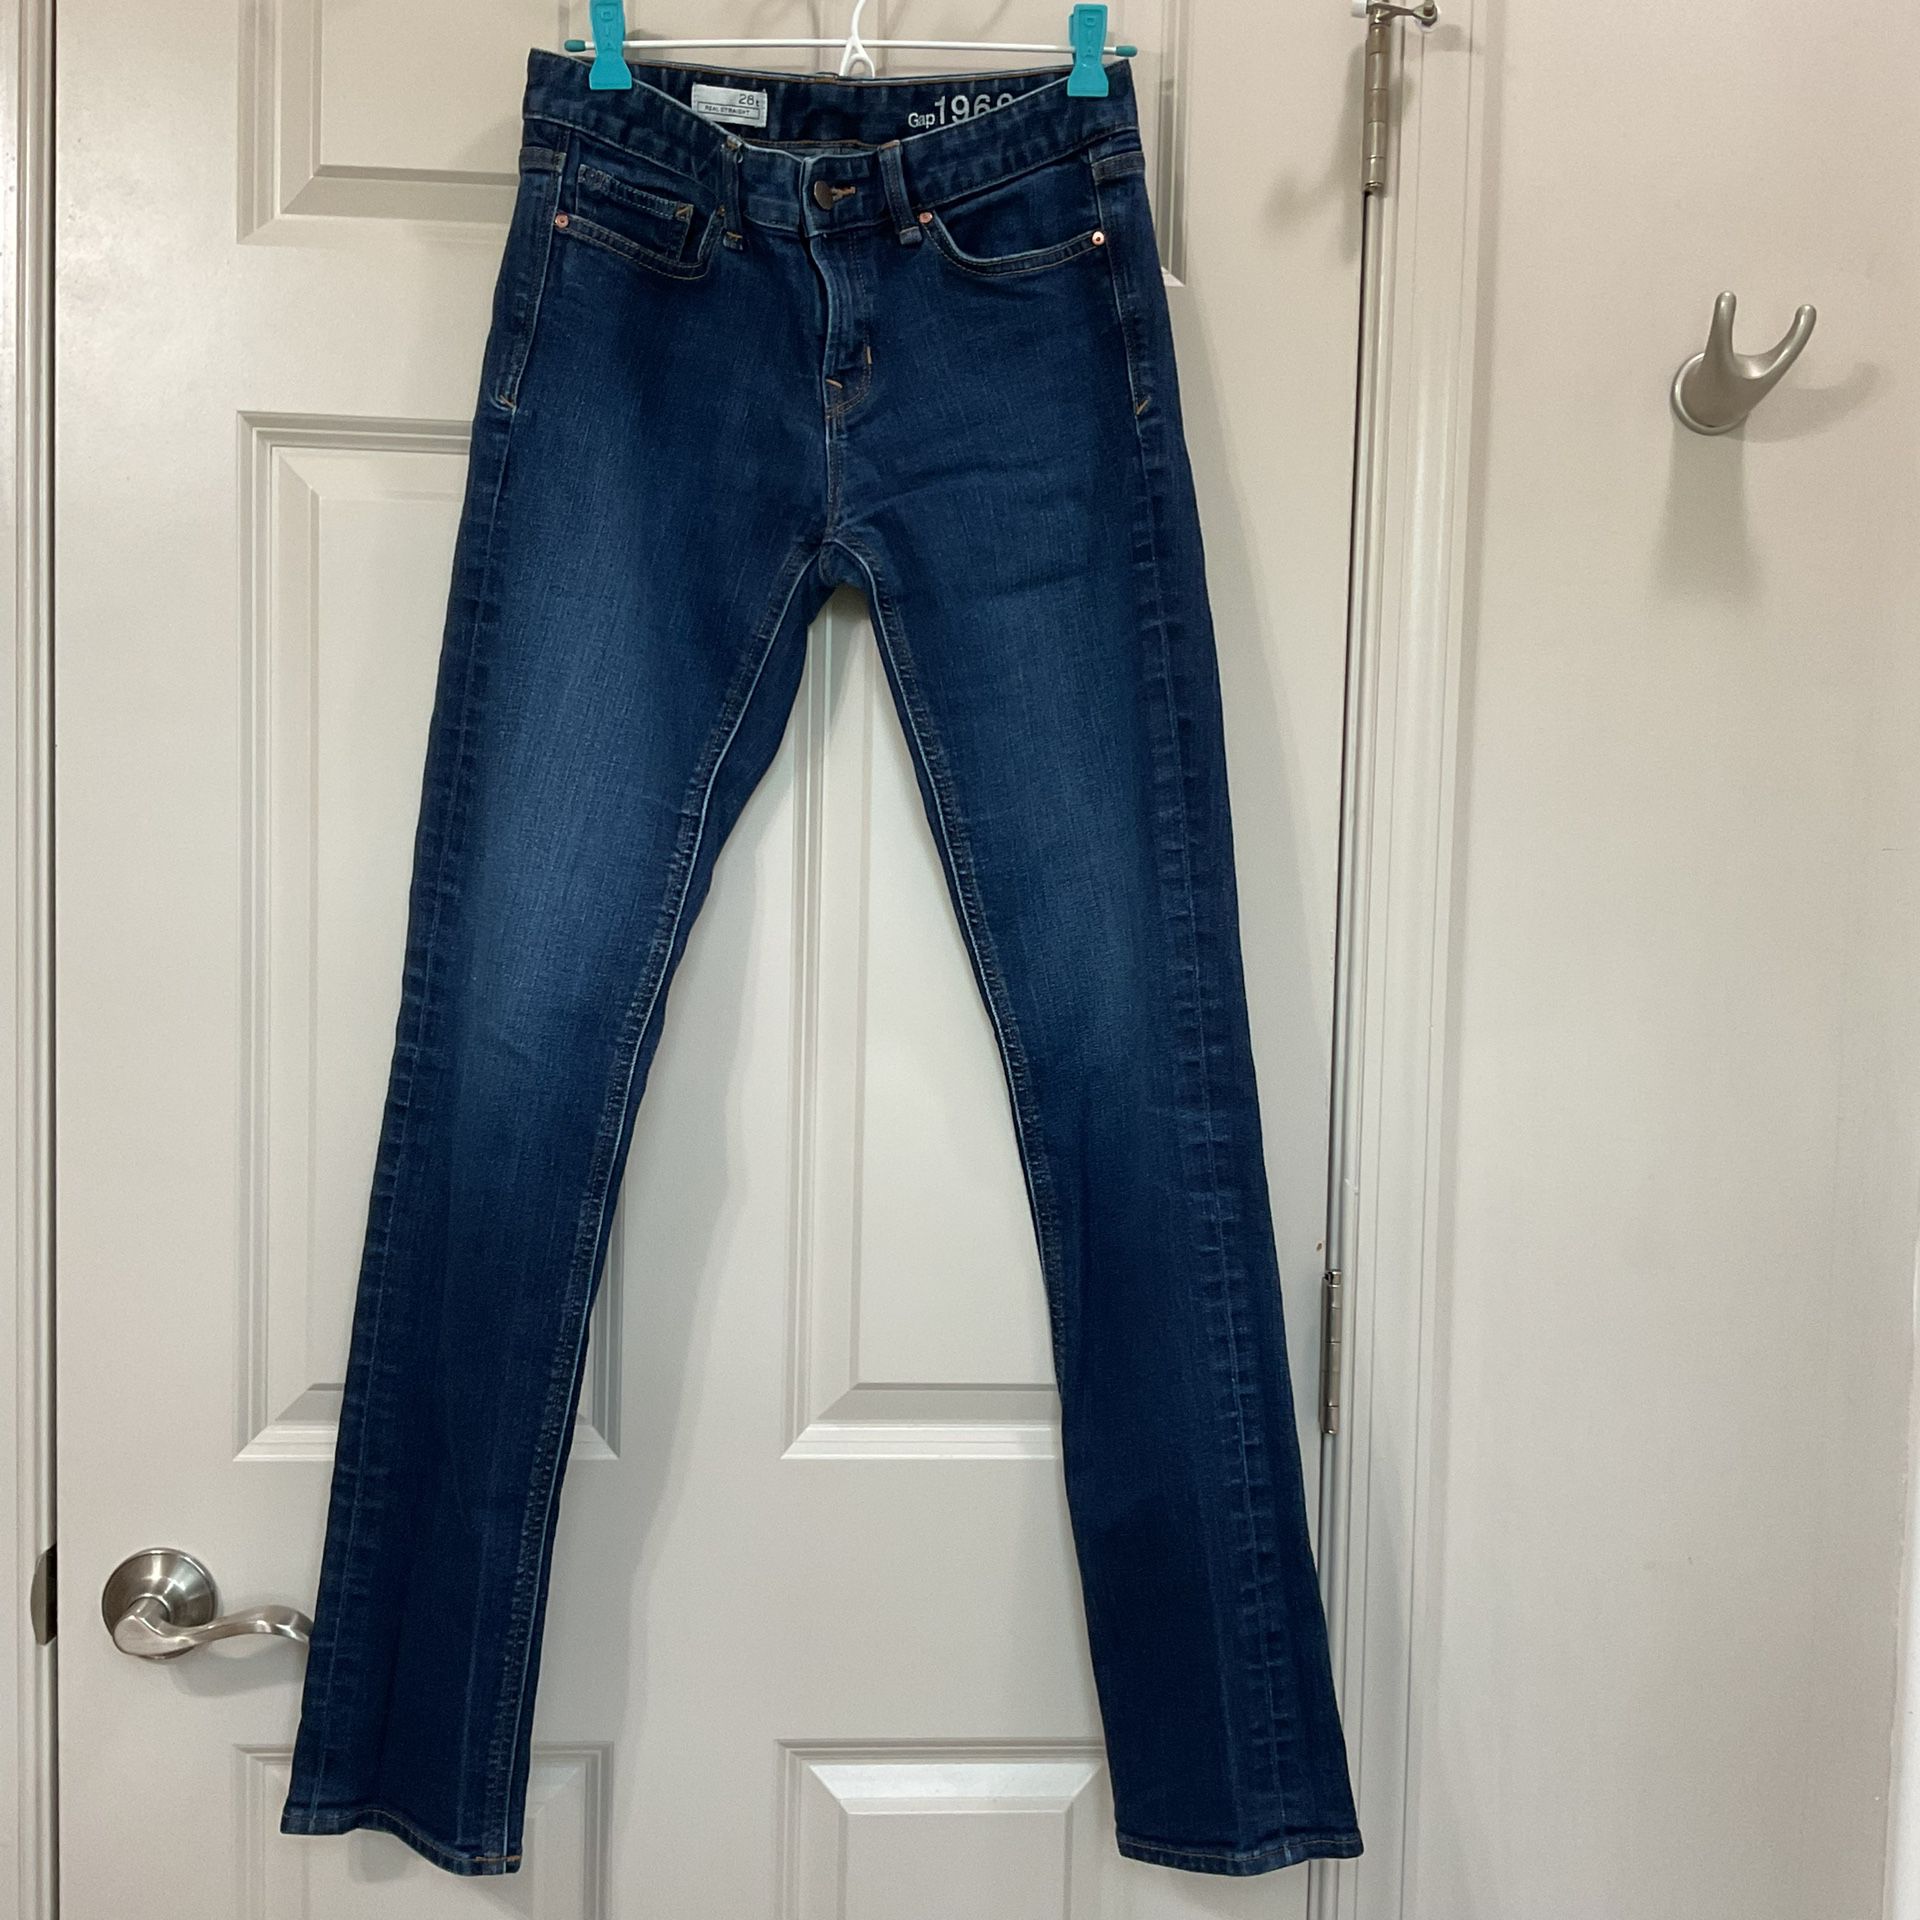 Gap 1969 - Real Straight Jeans. Size: 28 Tall. Womens. 